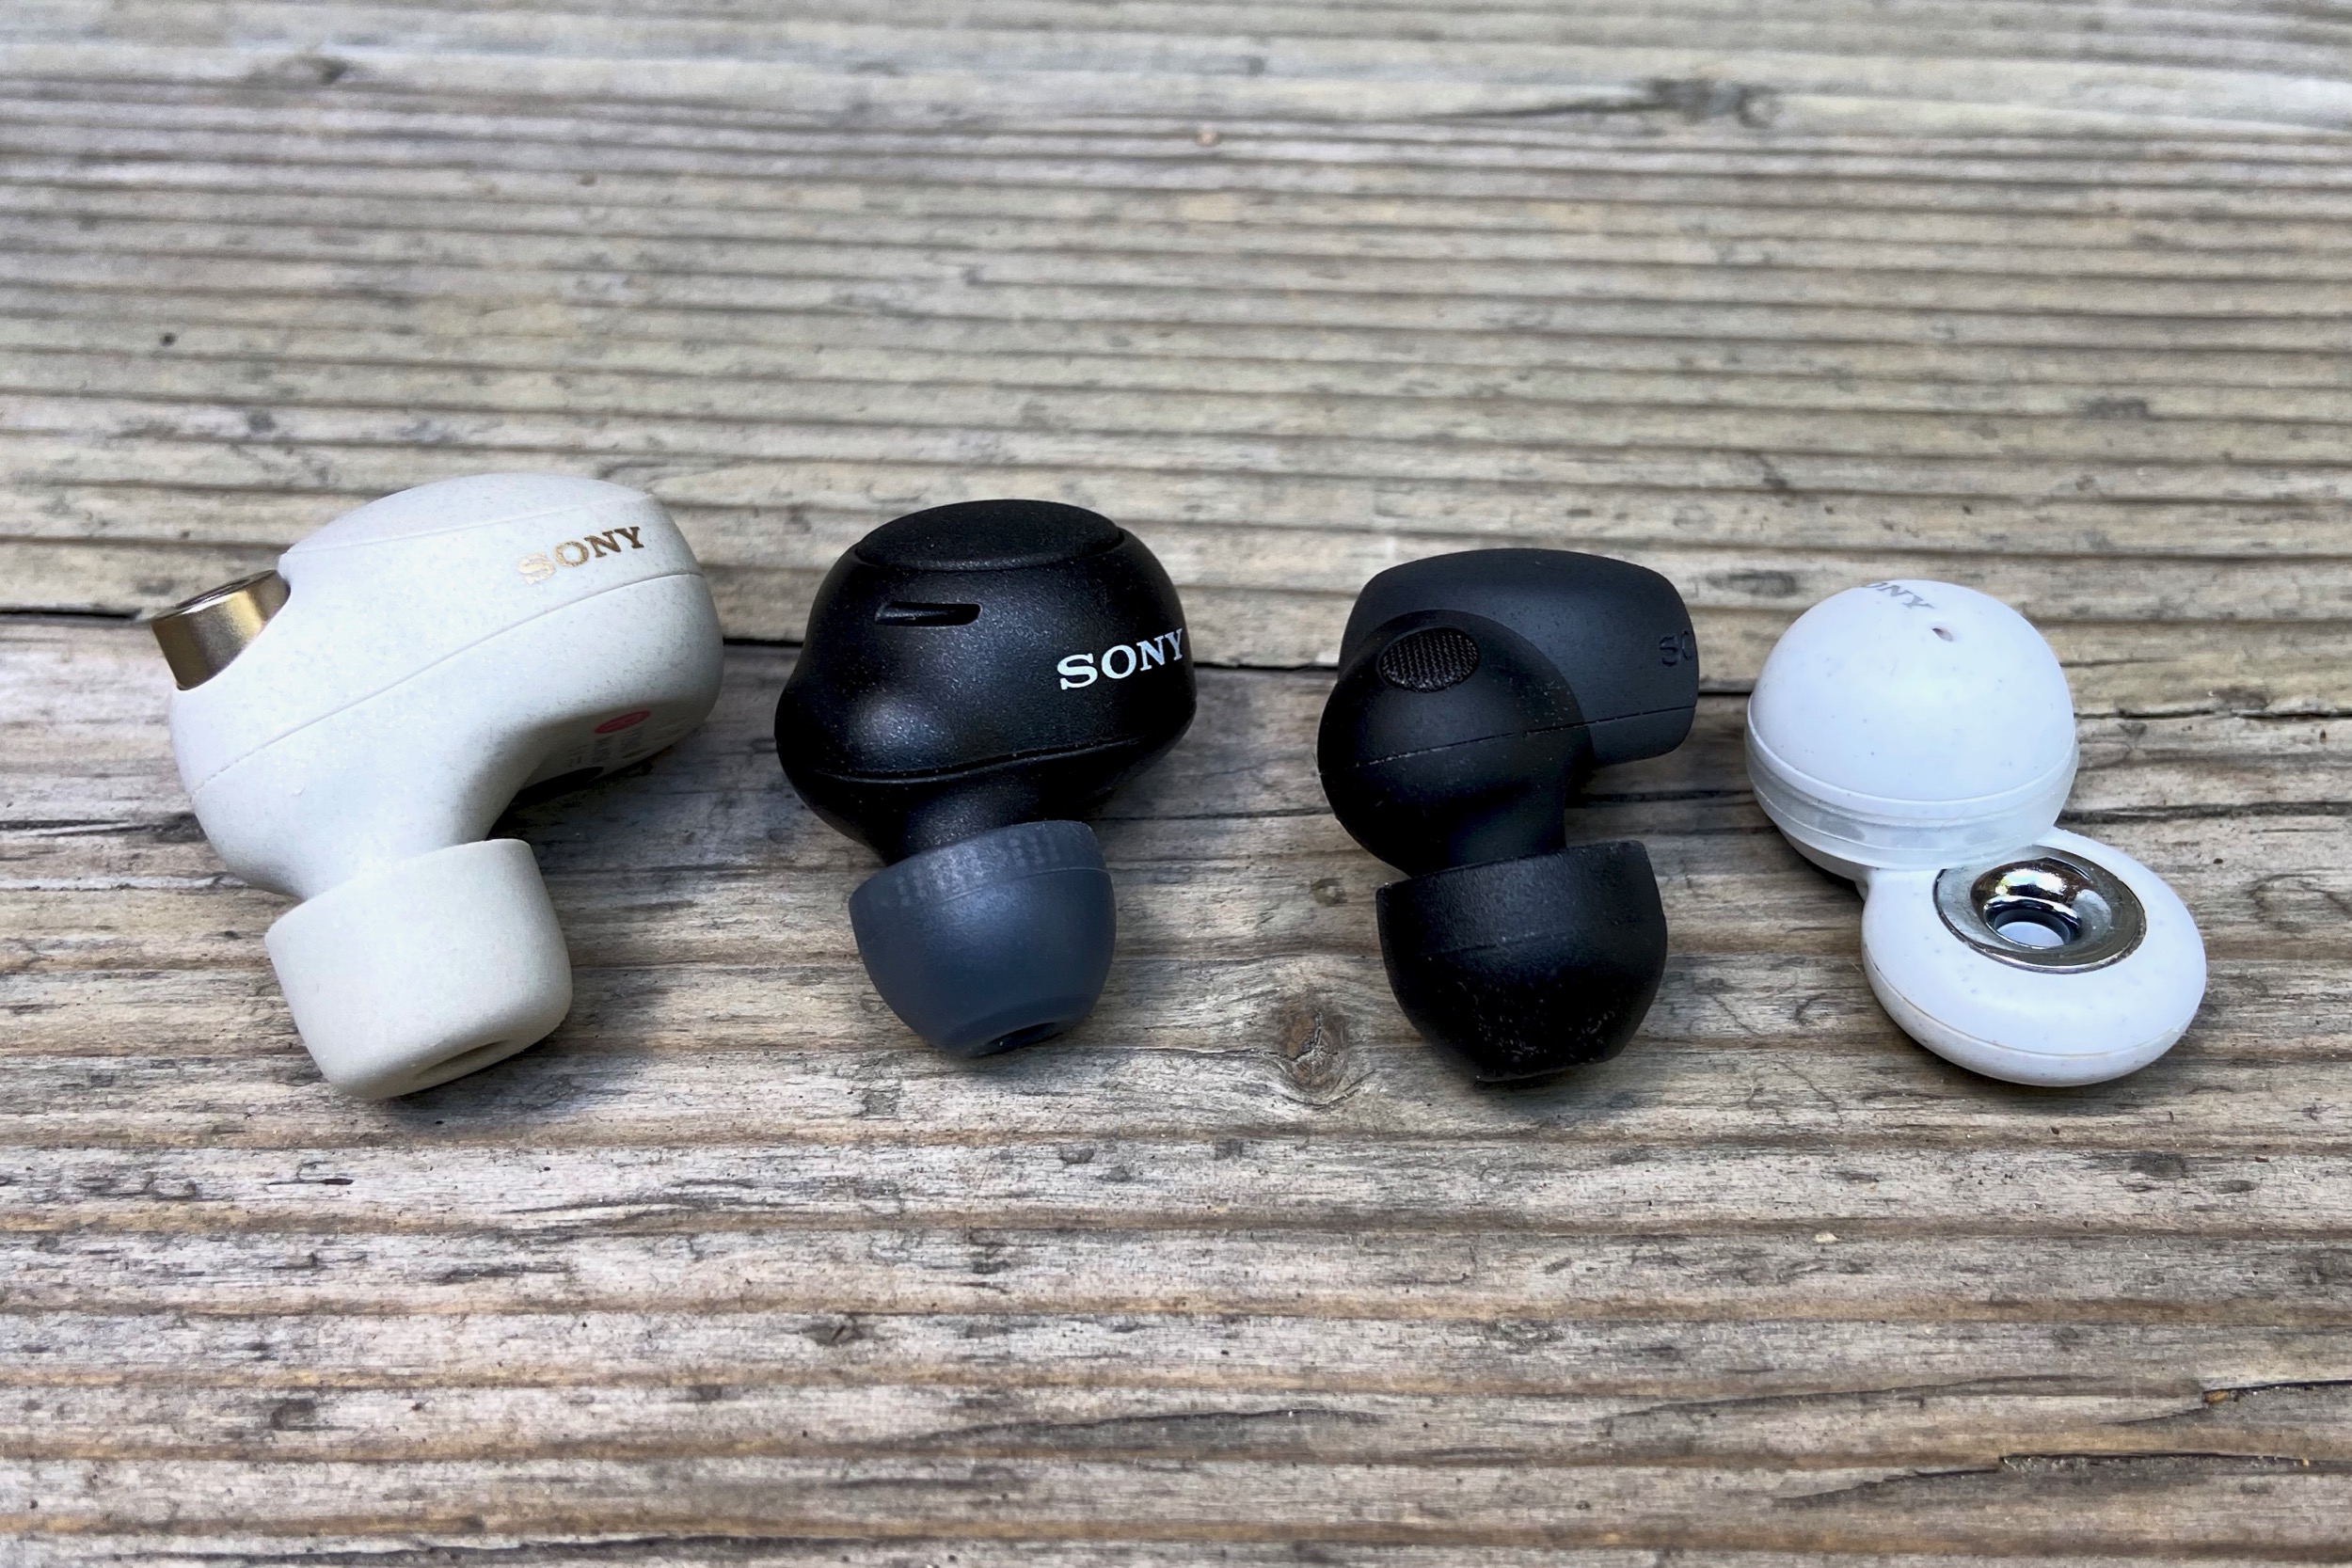 Sony LinkBuds S review: Tiny earbuds with big sound